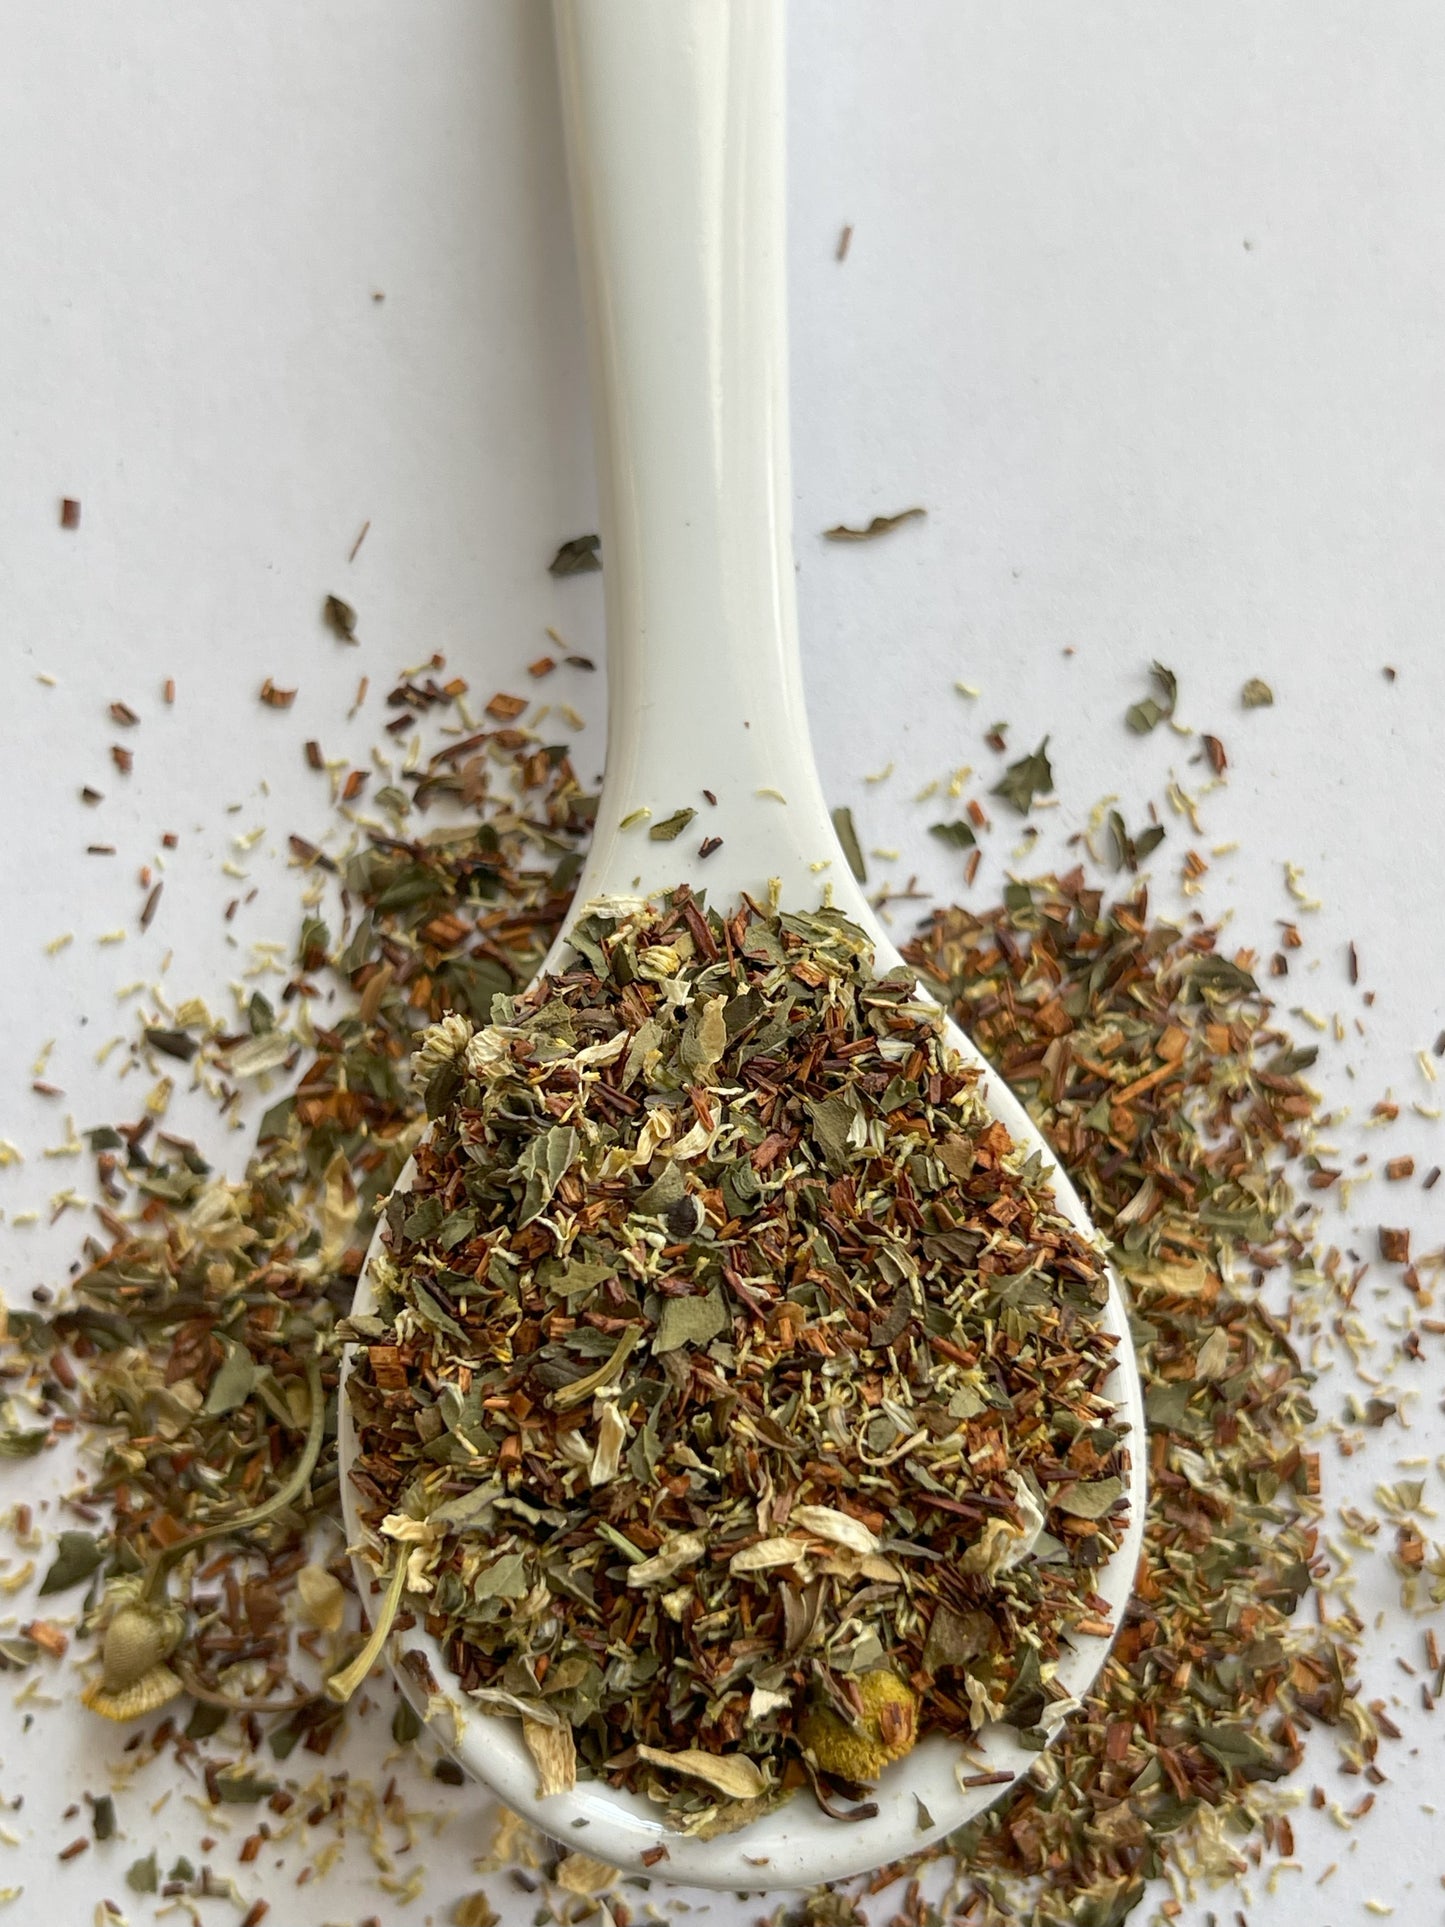 Herbal tea blend of Egyptian chamomile, South African Rooibos, fresh peppermint leaves, and natural vanilla bean.